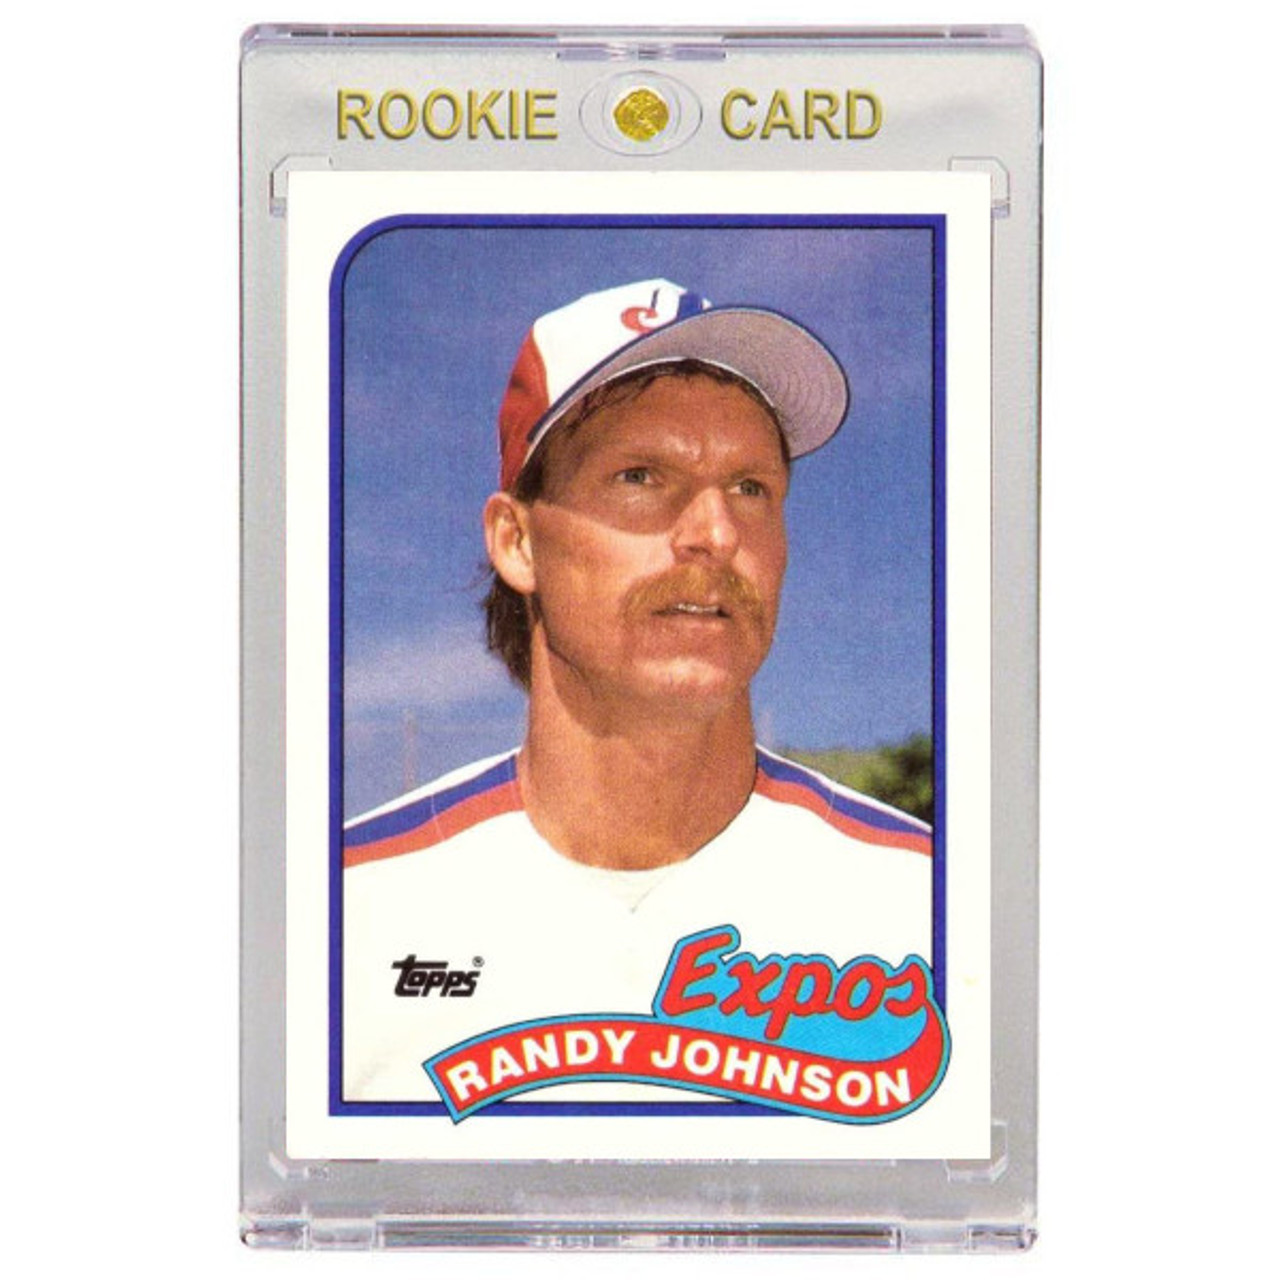 Remembering the night the 1988 Phillies faced Expos rookie Randy